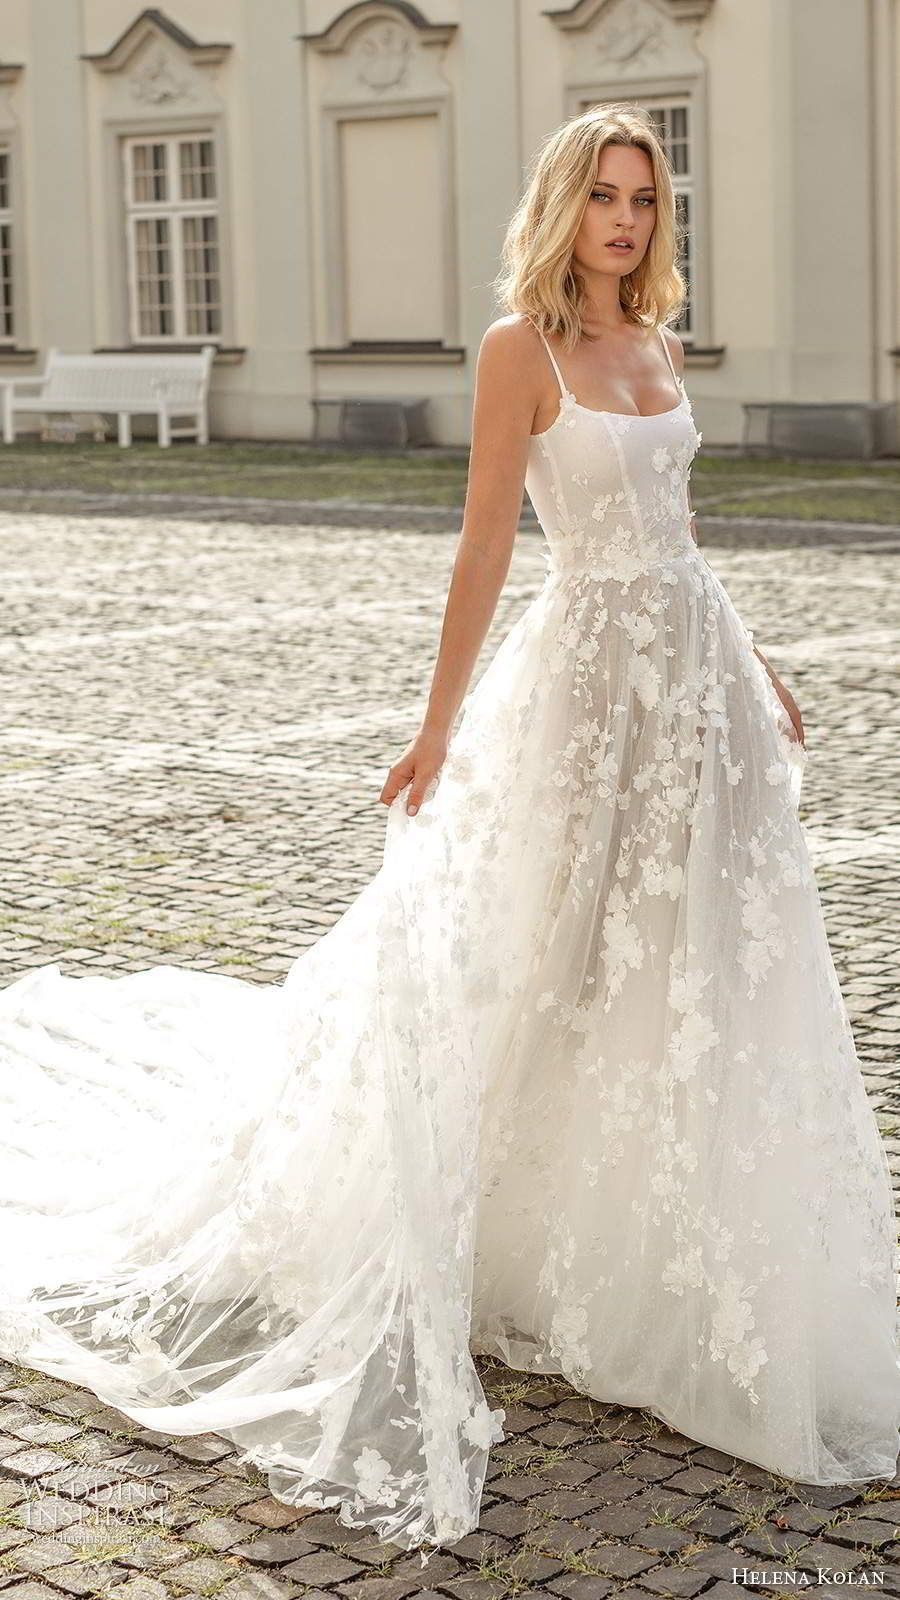 Simple Wedding Dresses For A Simple
Wedding